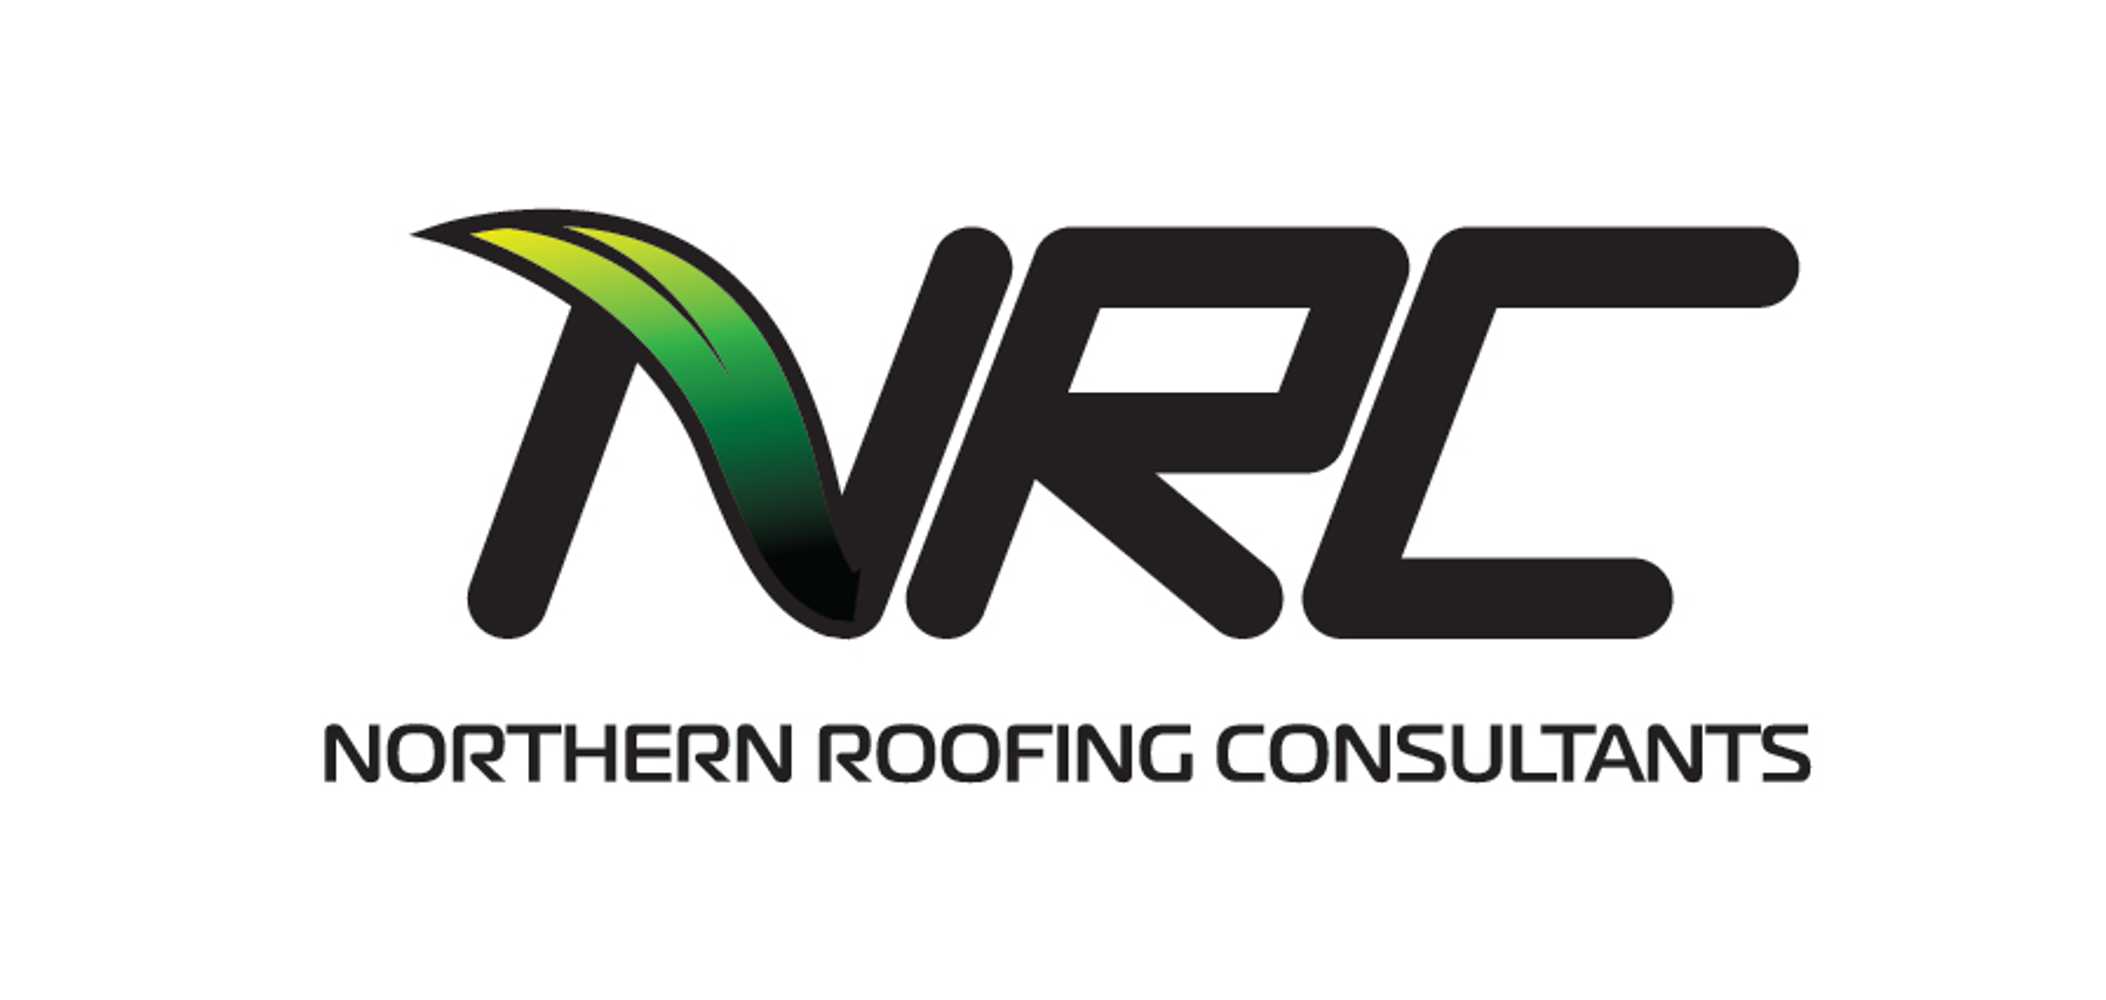 Project photos from Northern Roofing Consultants